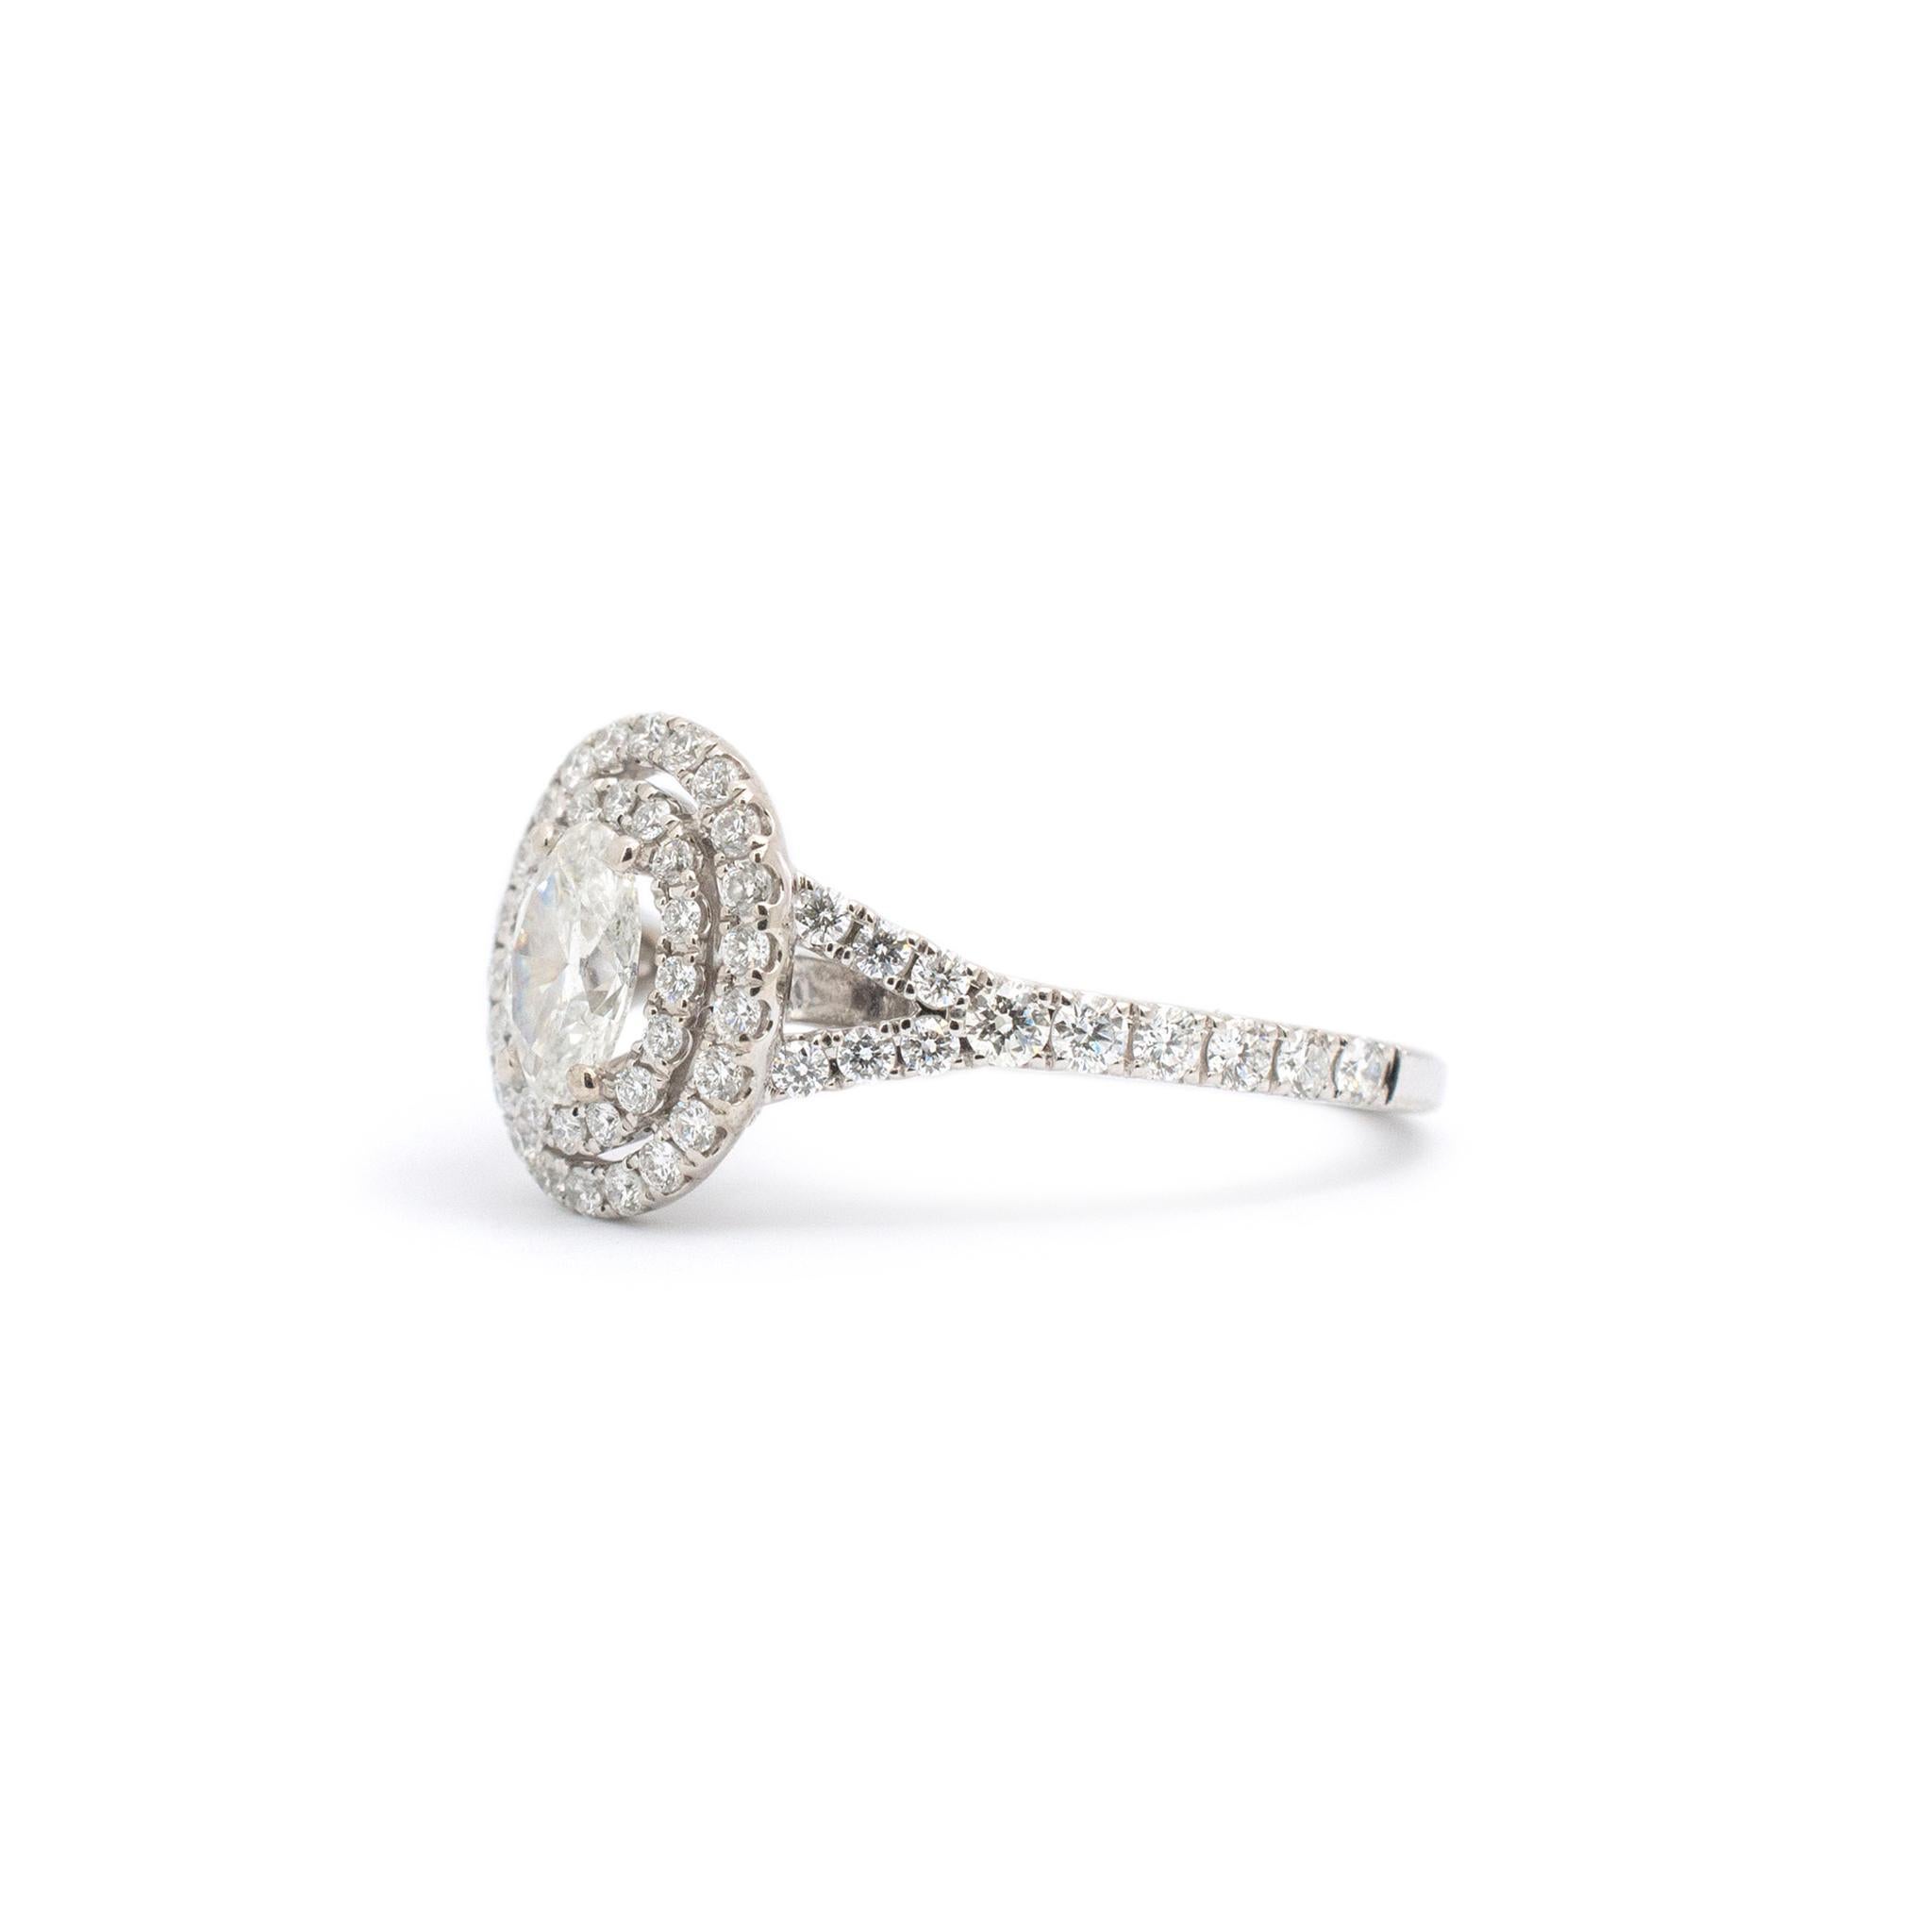 Gender: Ladies

Metal Type: 14K White Gold

Size: 5

Shank Maximum Width: 5.25 mm

Head Measures: 11.45mm x 10.10mm

Weight: 3.11 grams

Ladies 14K white gold diamond double-halo accented cluster ring with a half round shank. Engraved with